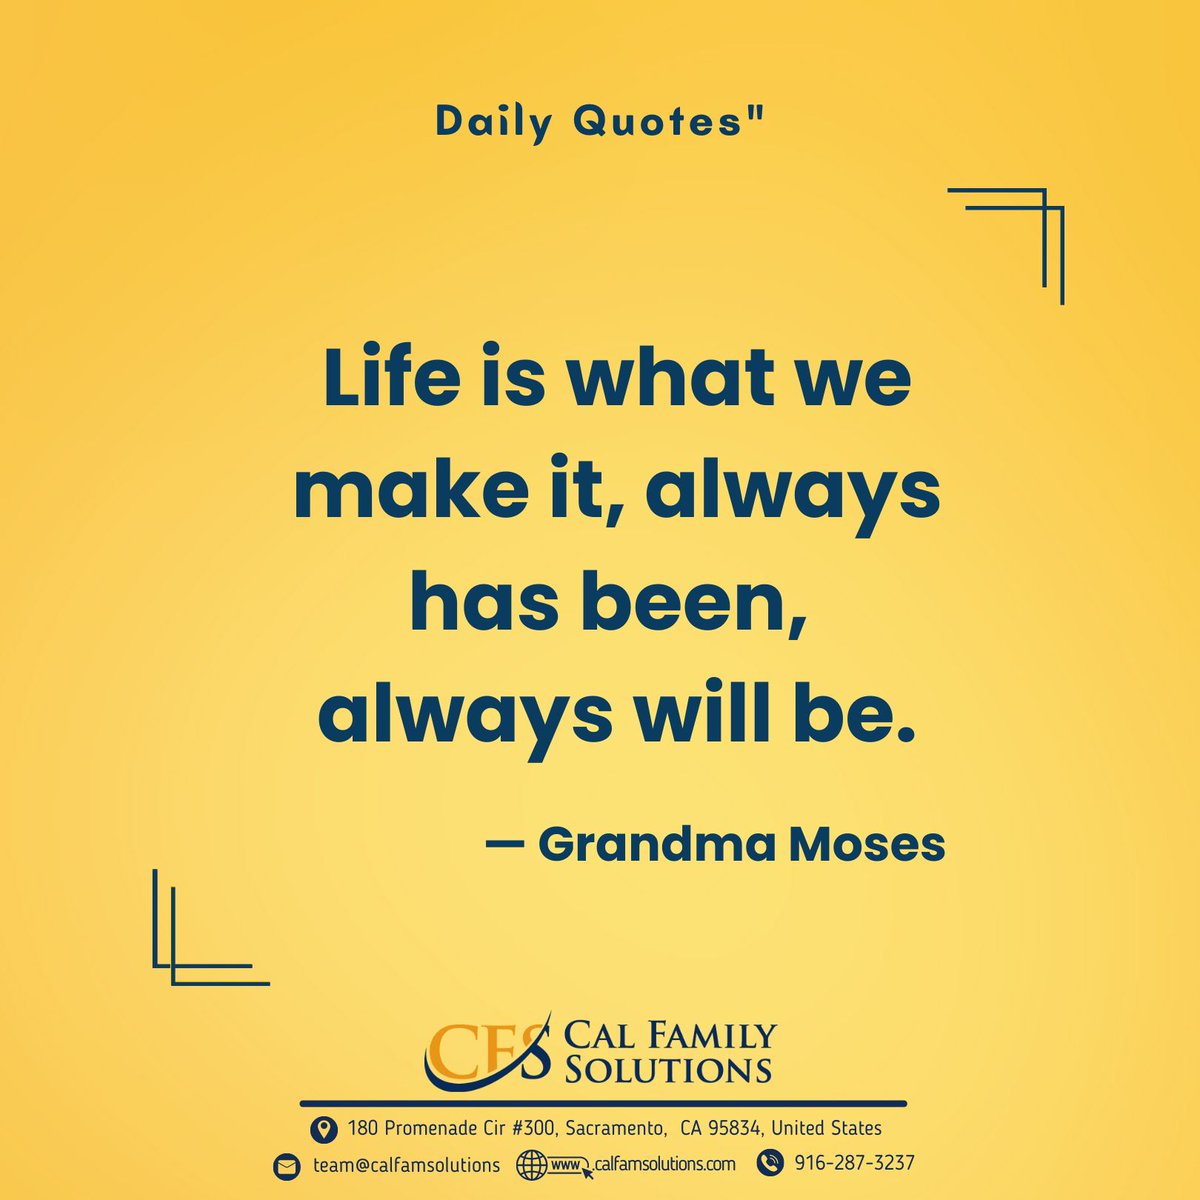 “Life is what we make it, always has been, always will be.” — Grandma Moses 📌🌈🌻🙏
#divorcesupport #divorcerecovery #divorcecoach #relationship #woman #Dailyquote #instaquote #momlife #DivorceLawyer #DivorceAttorney #DivorceSurvivor #LifeAfterDivorce #DivorceLawyerCA